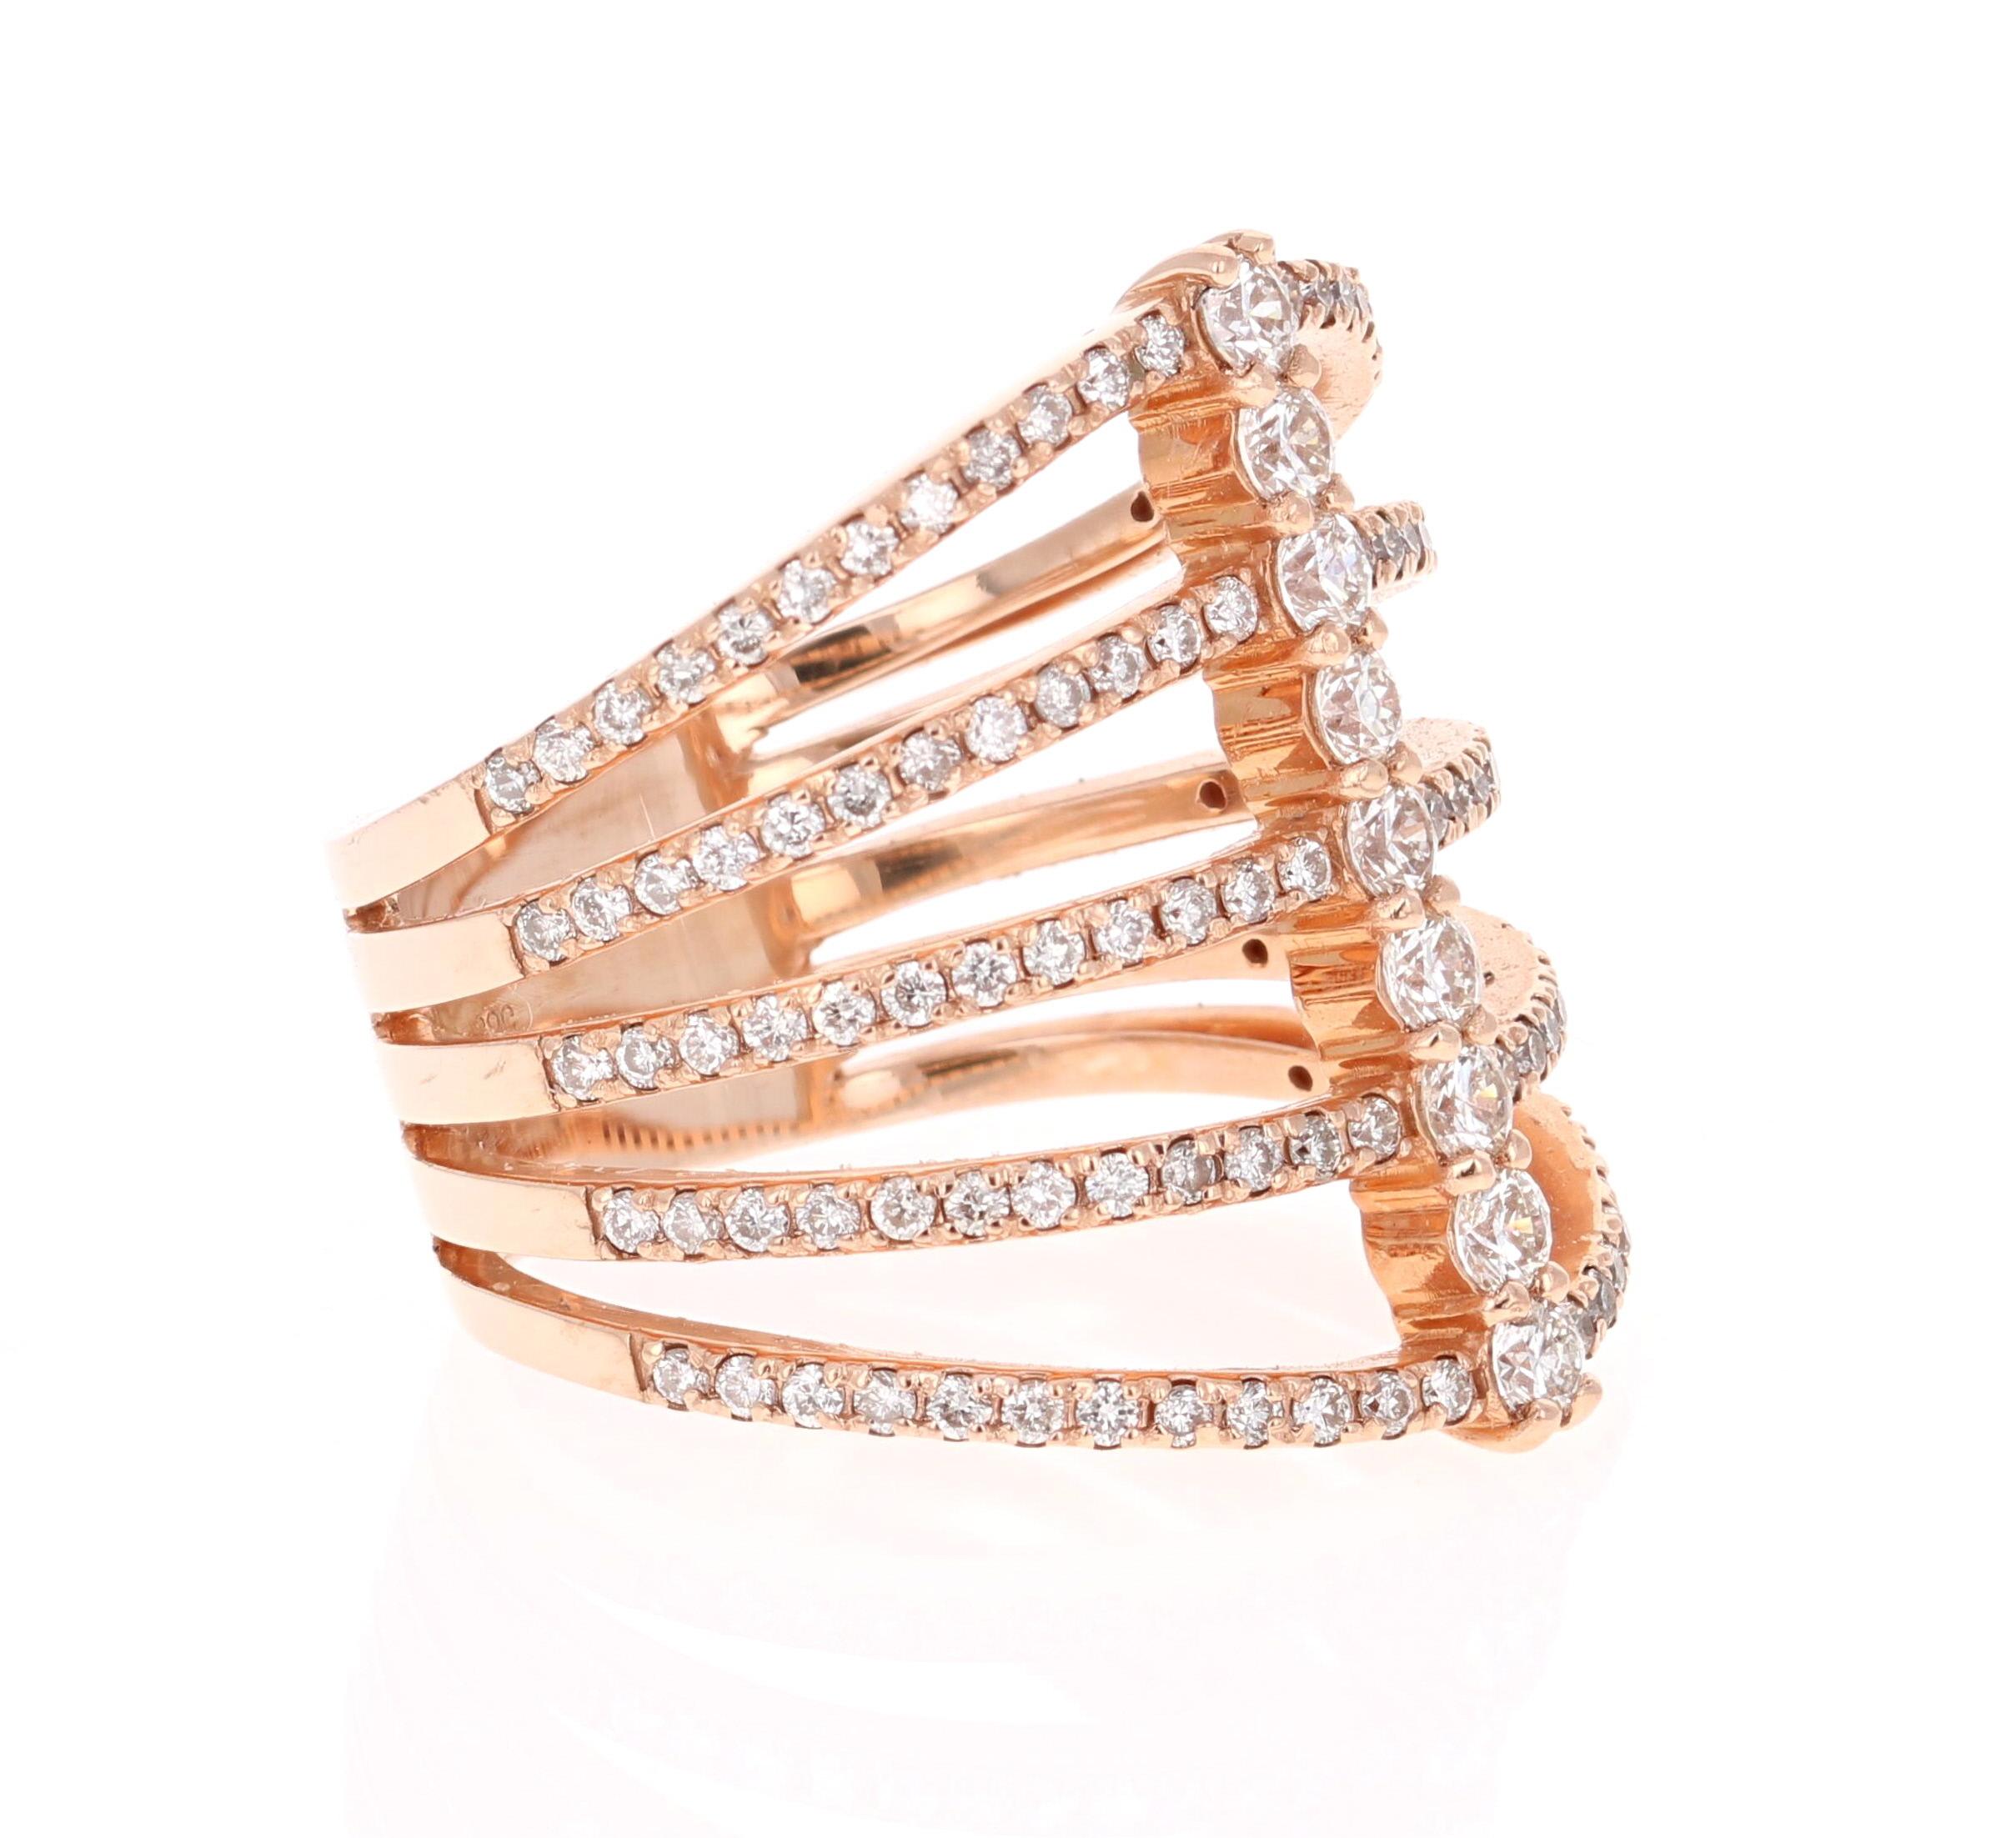 This ring has 129 Round Cut Diamonds that weigh 1.23 Carats. The clarity and color of the diamonds are VS-H.

Crafted in 14 Karat Rose Gold and is approximately 7.7 grams 

The ring is a size 7 and can be re-sized at no additional charge!